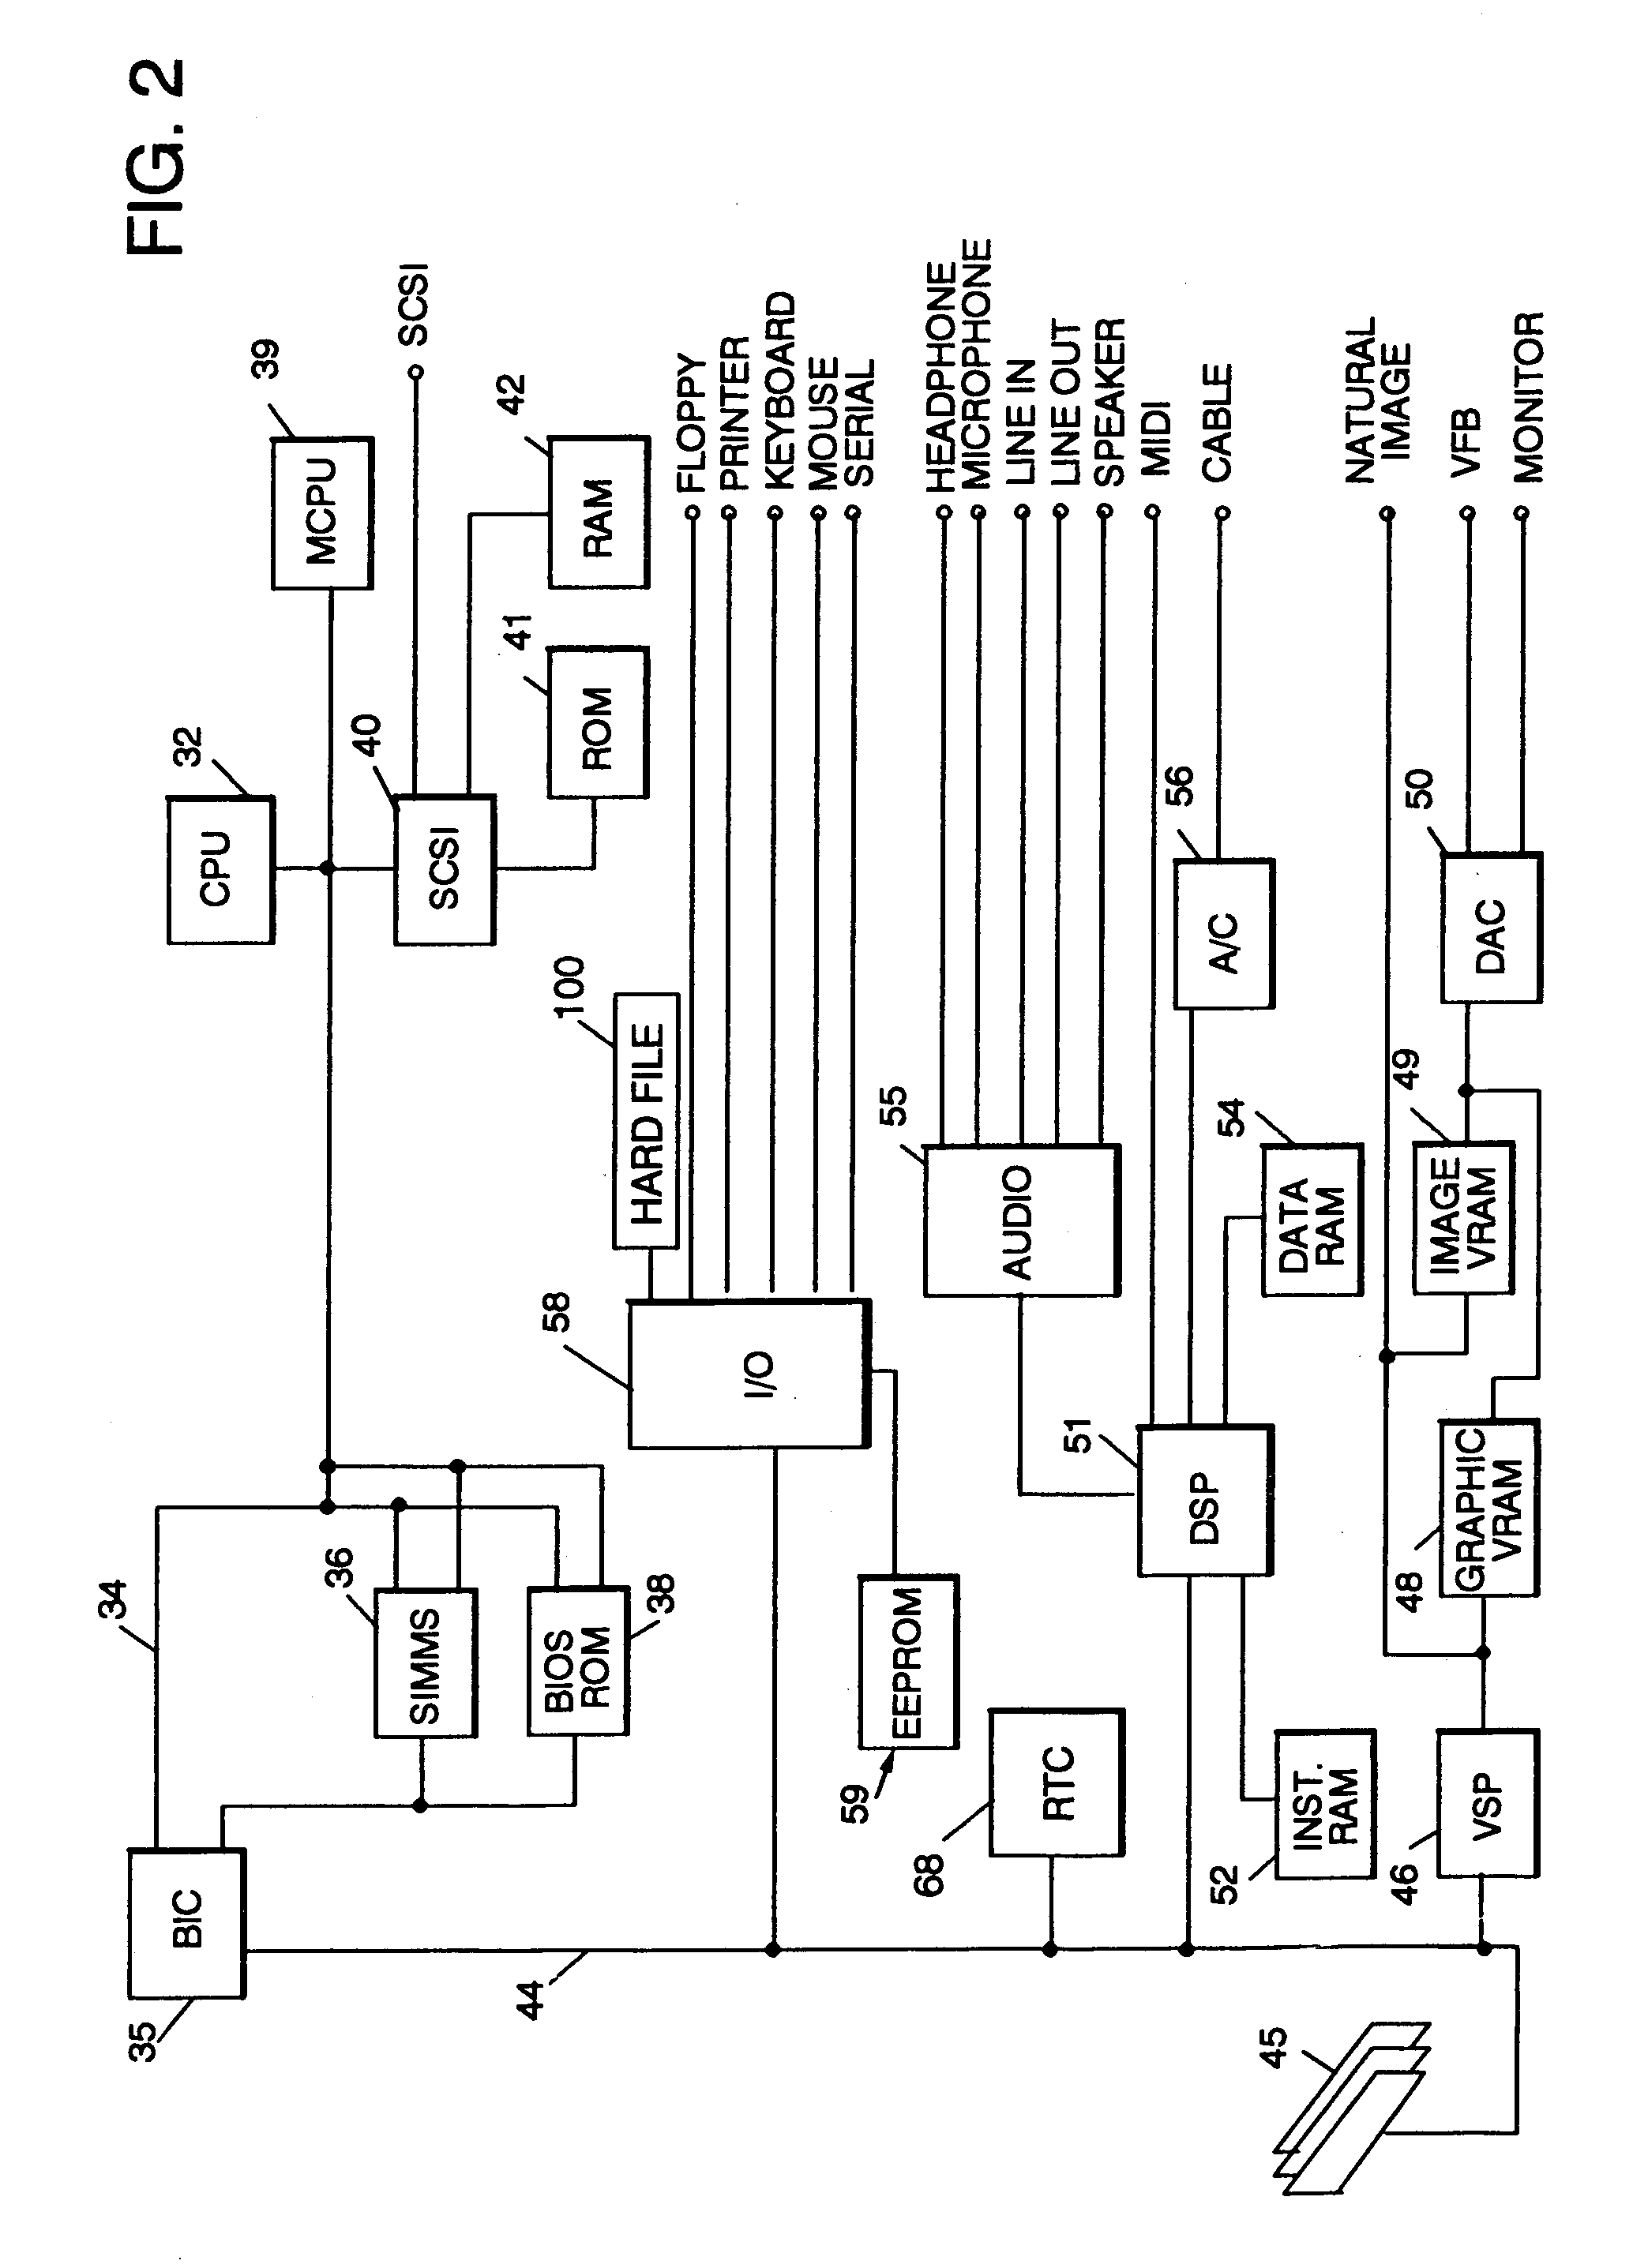 System and method for installing personal computer software